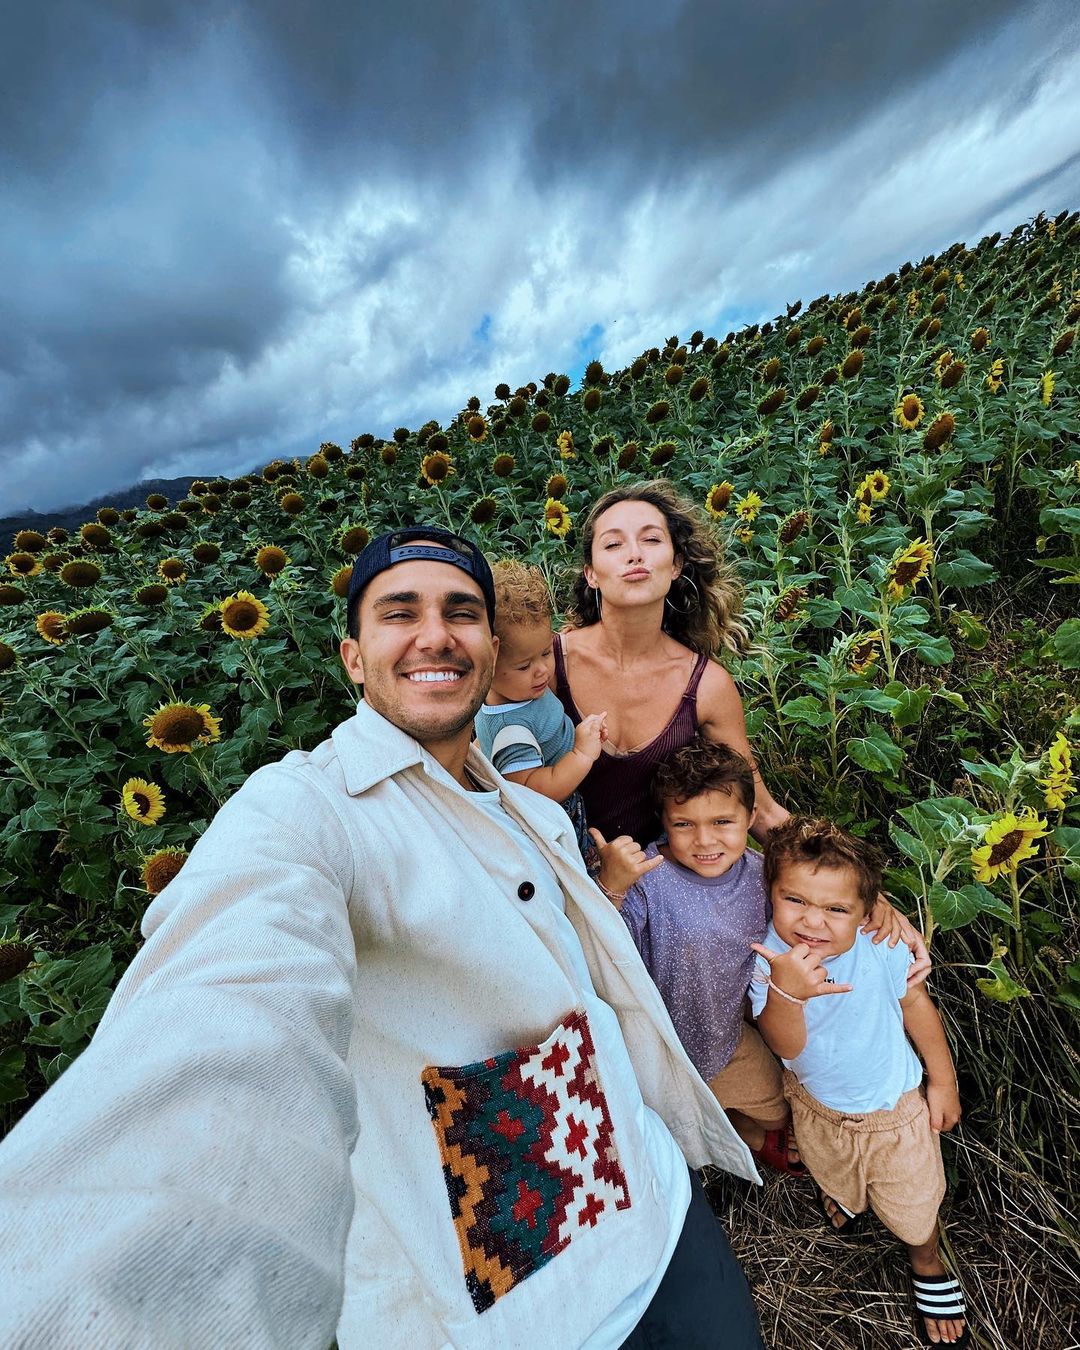 Carlos PenaVega and his wife, Alexa, are parents to three kids.